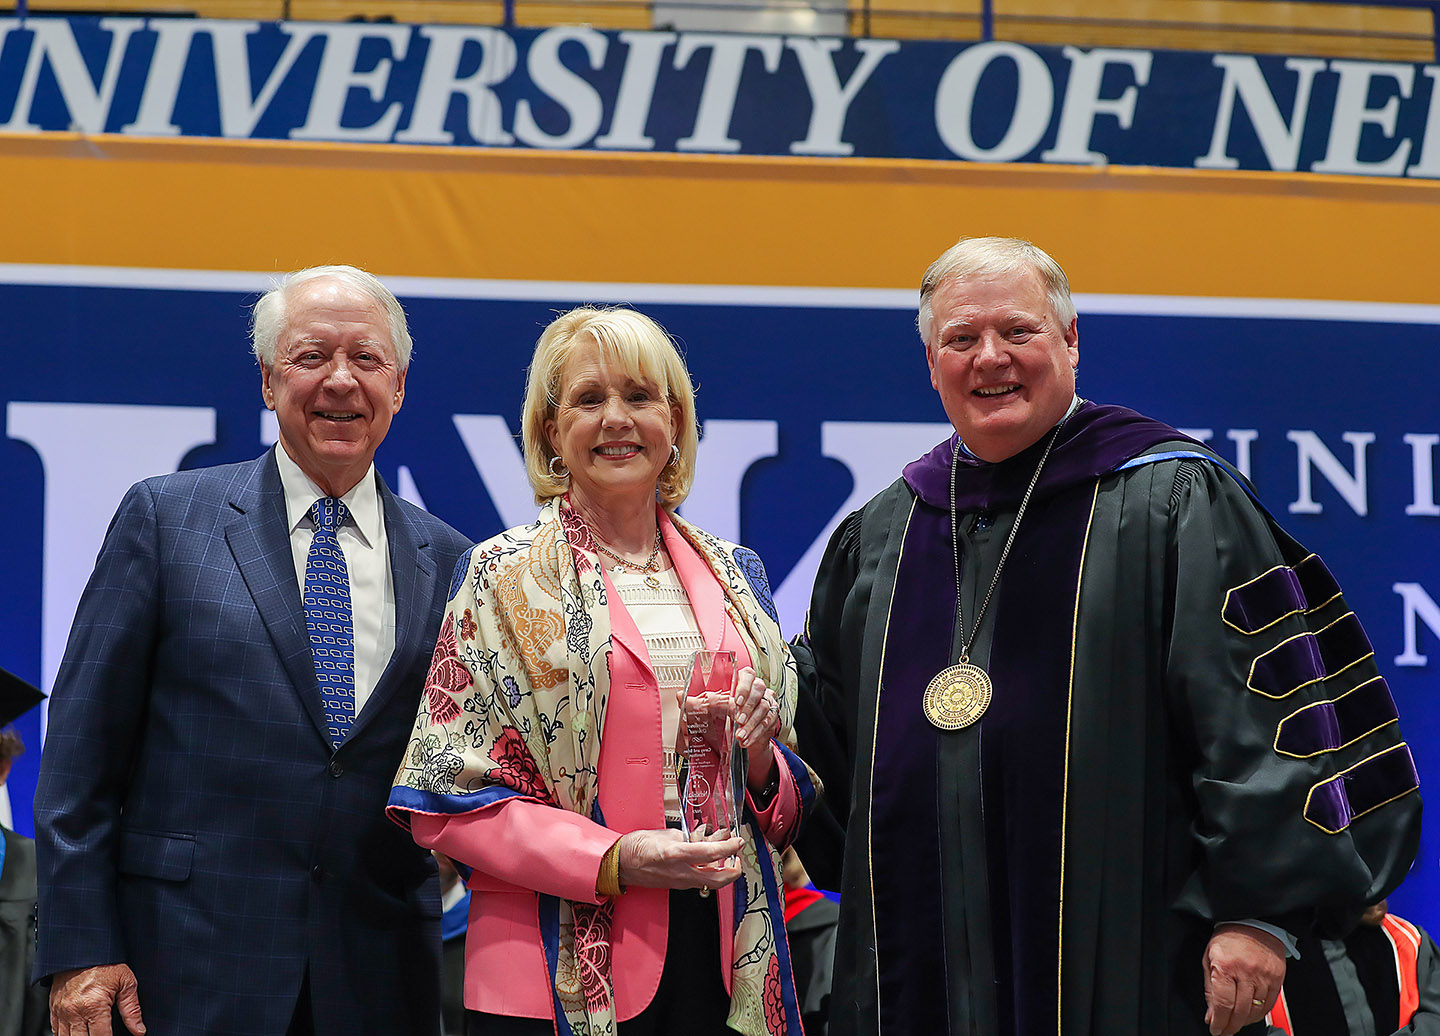 UNK Chancellor Doug Kristensen, right, presents the Ron and Carol Cope Cornerstone of Excellence Award to Brian and Carey Hamilton during Friday’s spring commencement ceremony. (Photo by Erika Pritchard, UNK Communications)